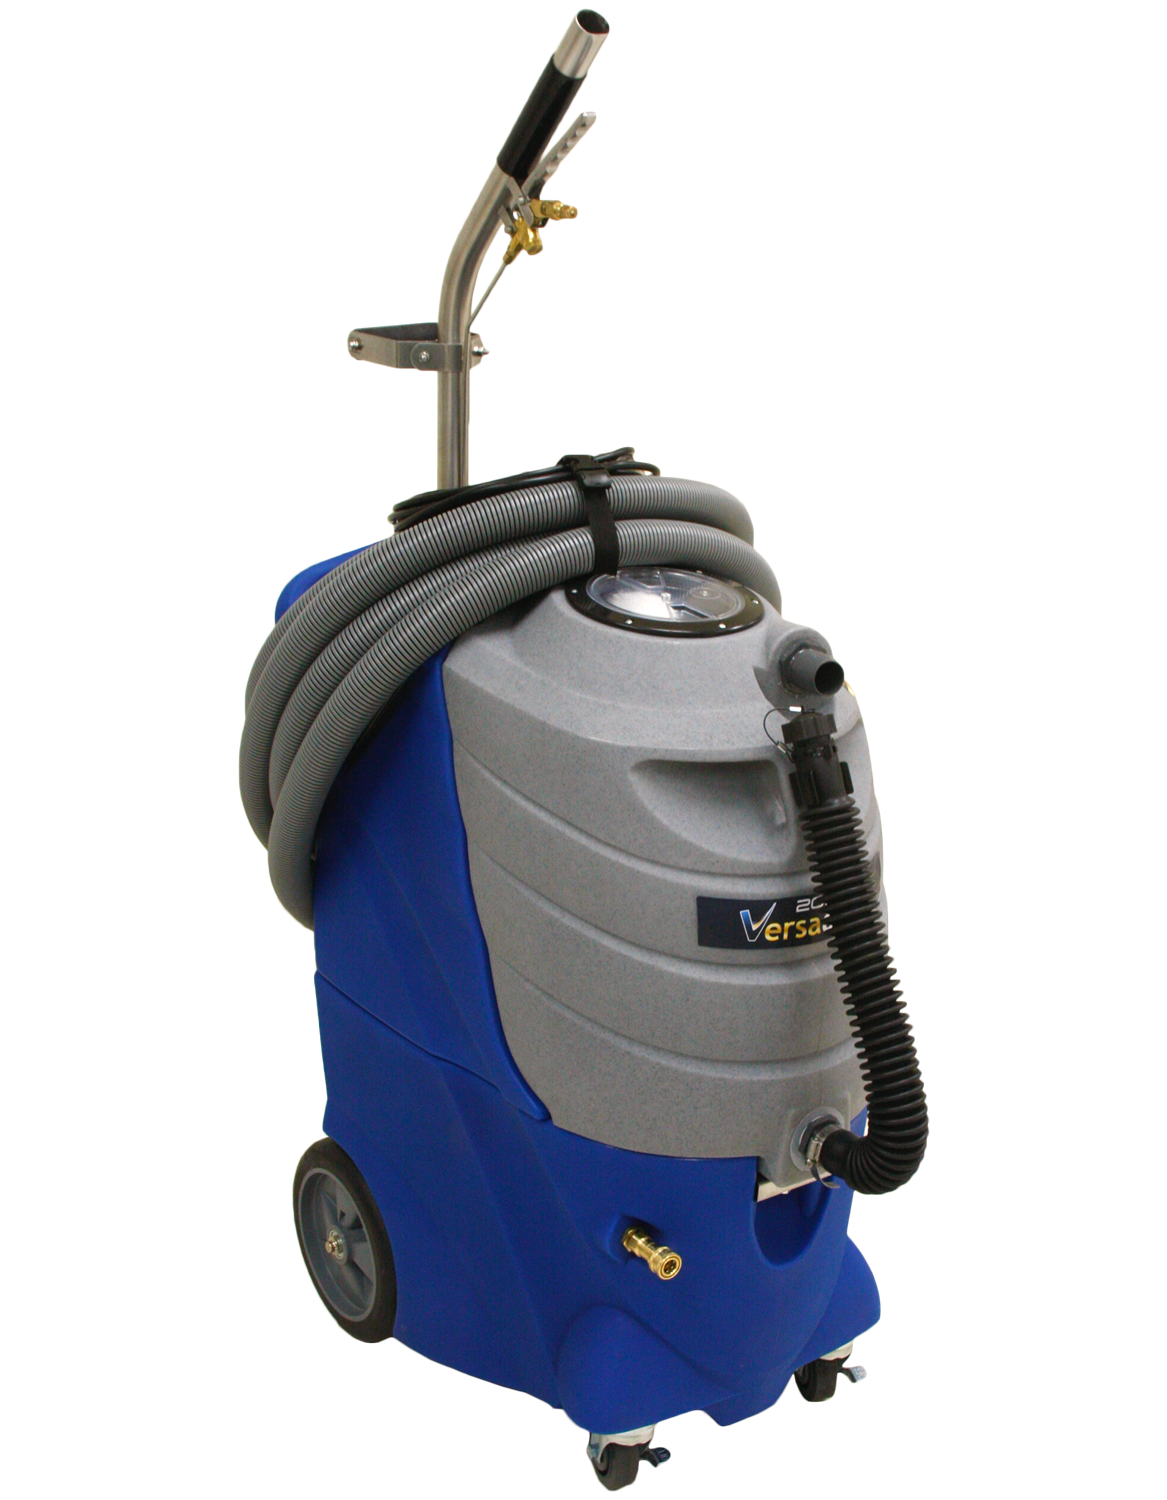 Carpet Cleaner & Flood Extraction System